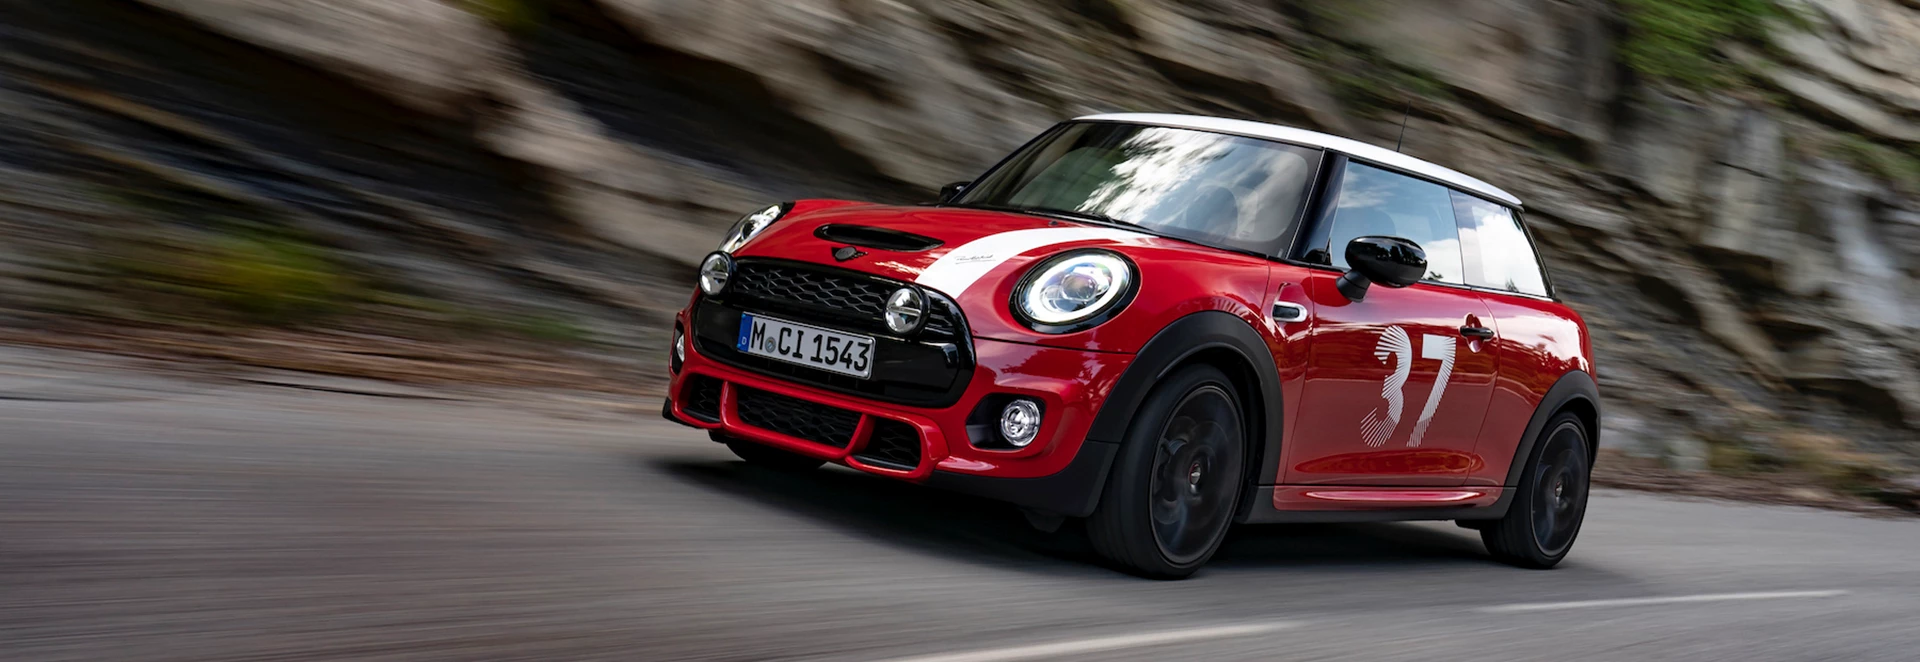 Mini celebrates past rally heritage with new Paddy Hopkirk Edition 